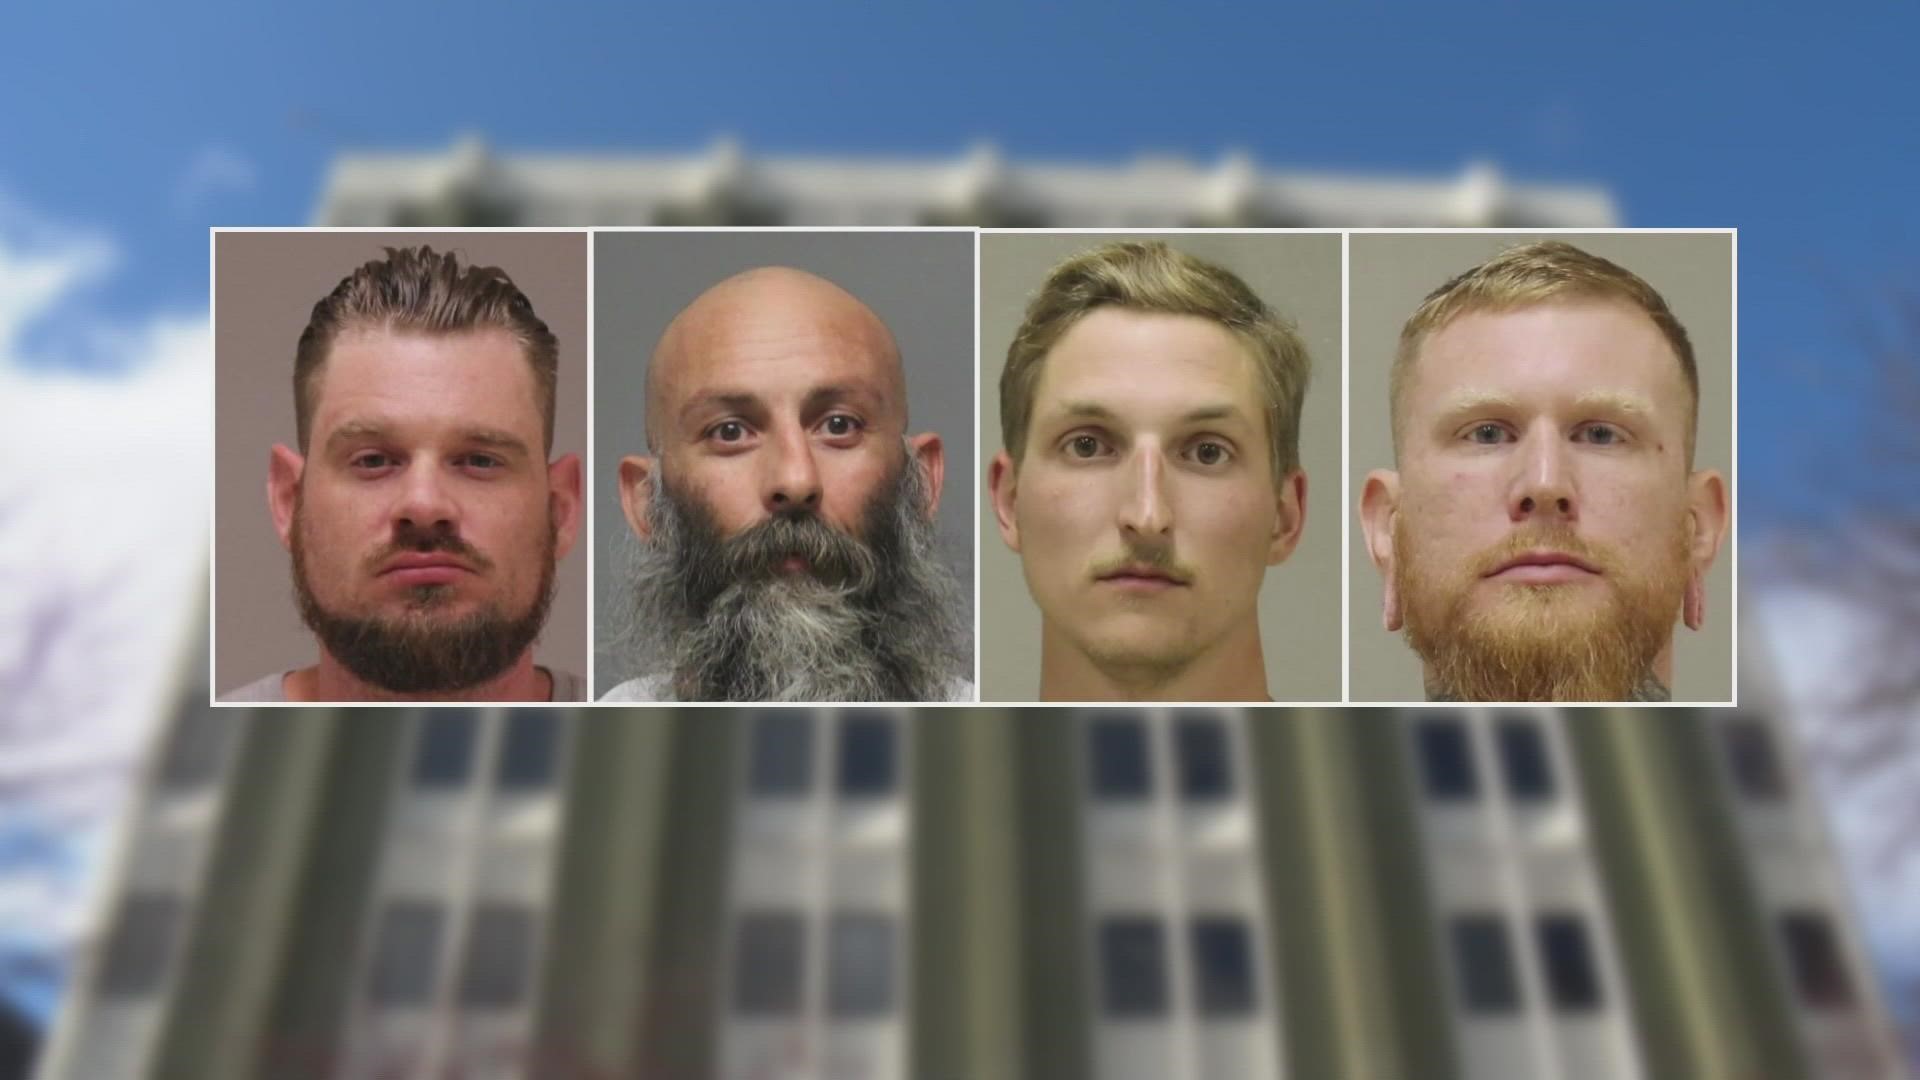 The prosecutor said the four men accused were antigovernment extremists "filled with rage" and intent on igniting a civil war.